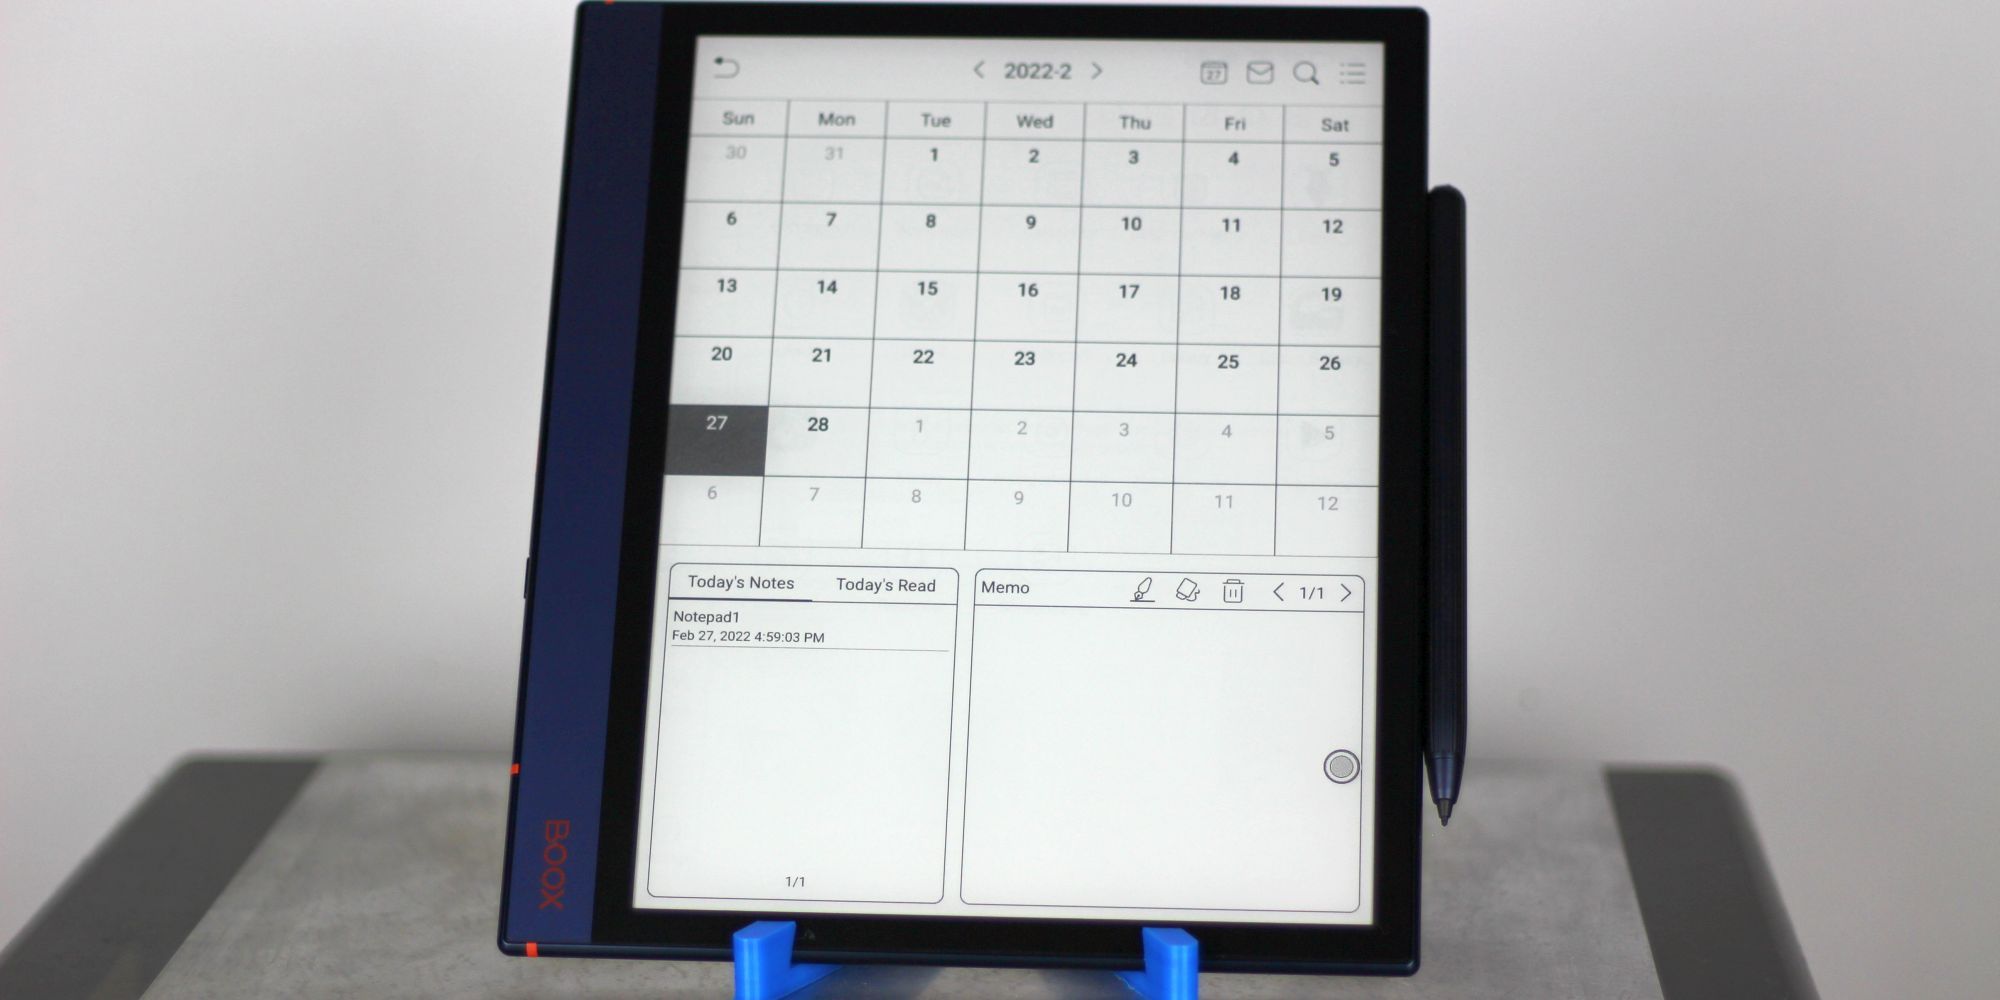 Onyx Boox Note Air3 Puts Touchscreen, Stylus, and Android 12 In A  Textbook-Sized E-Reader